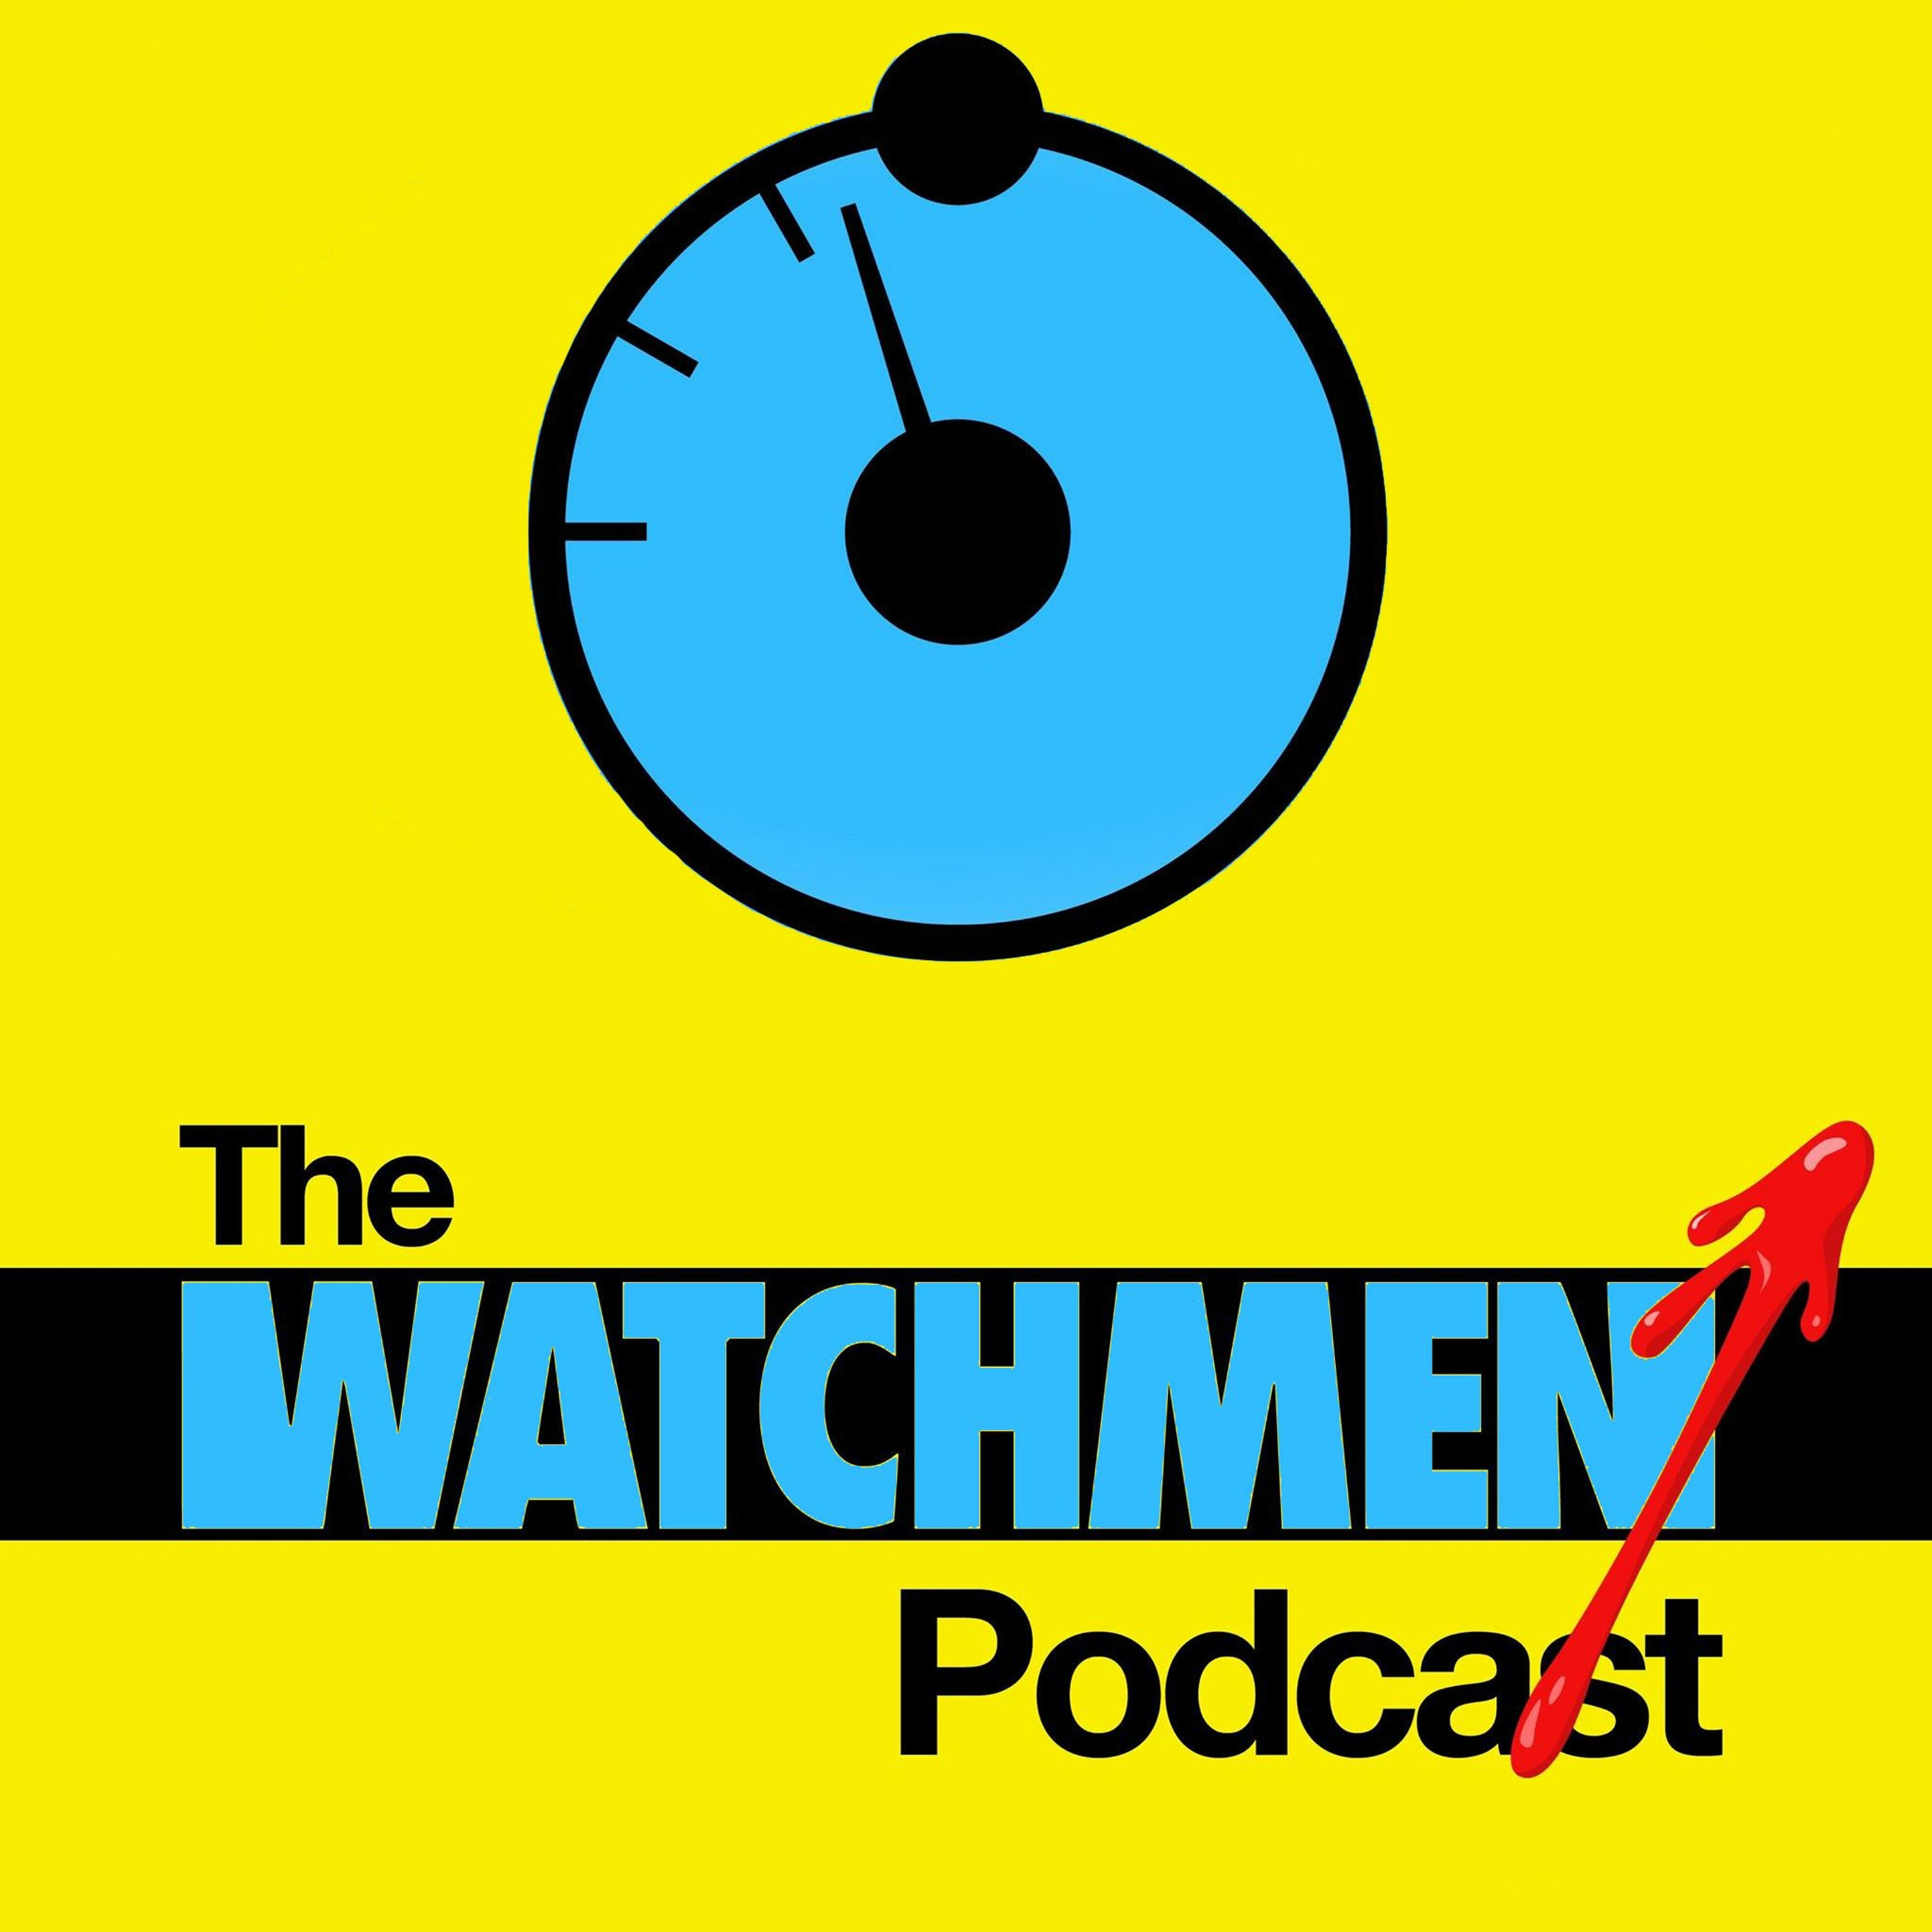 Watchmen 103 "She Was Killed by Space Junk" Recap & Review